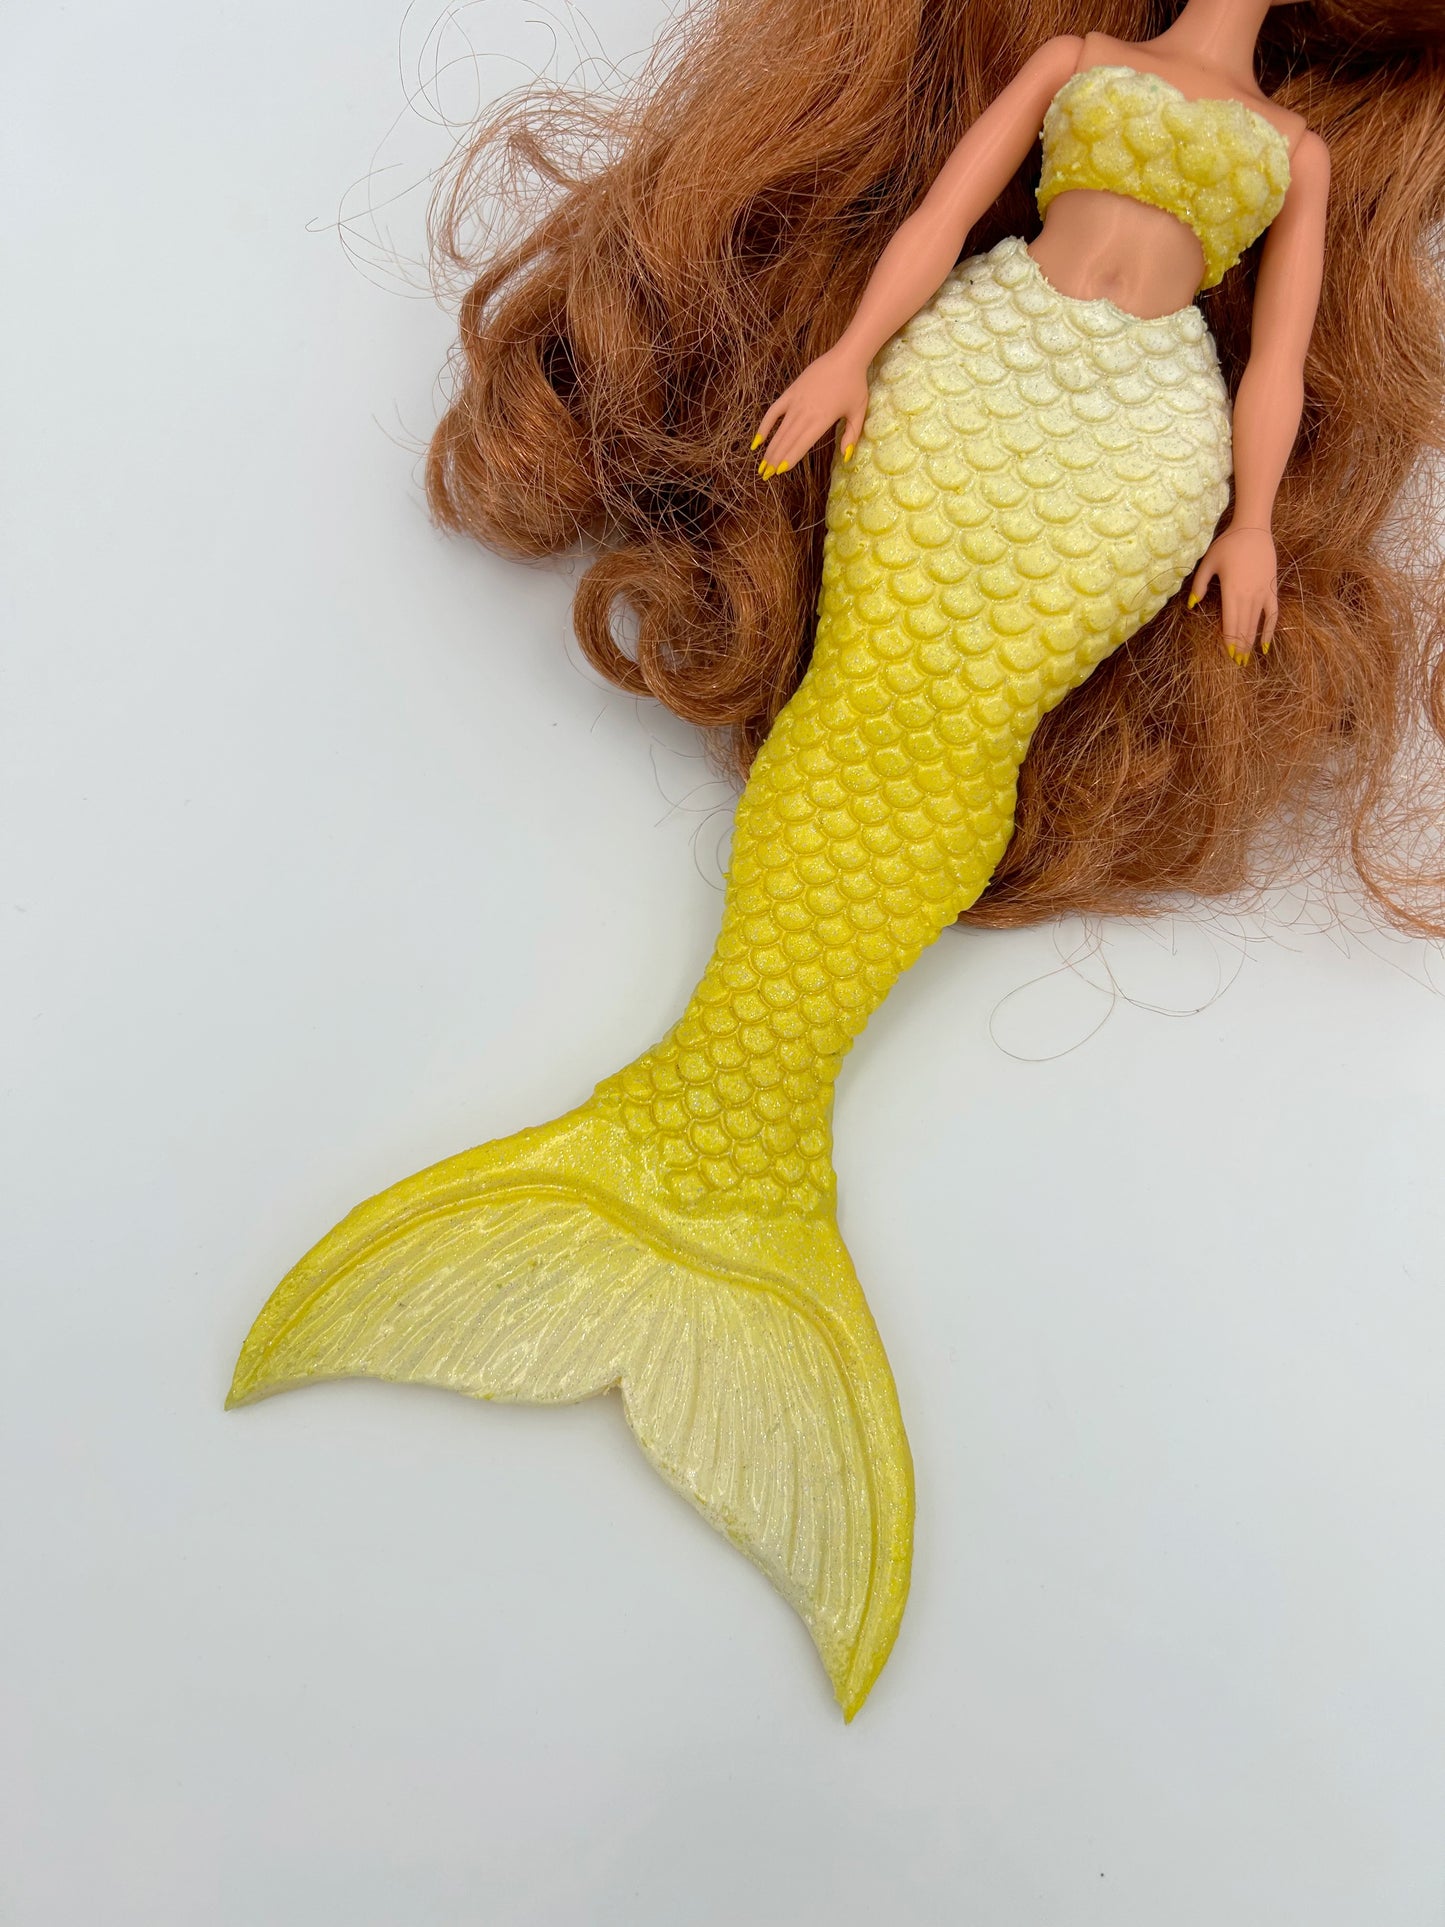 Whale silicone mermaid tail and bra for doll (doll not included)